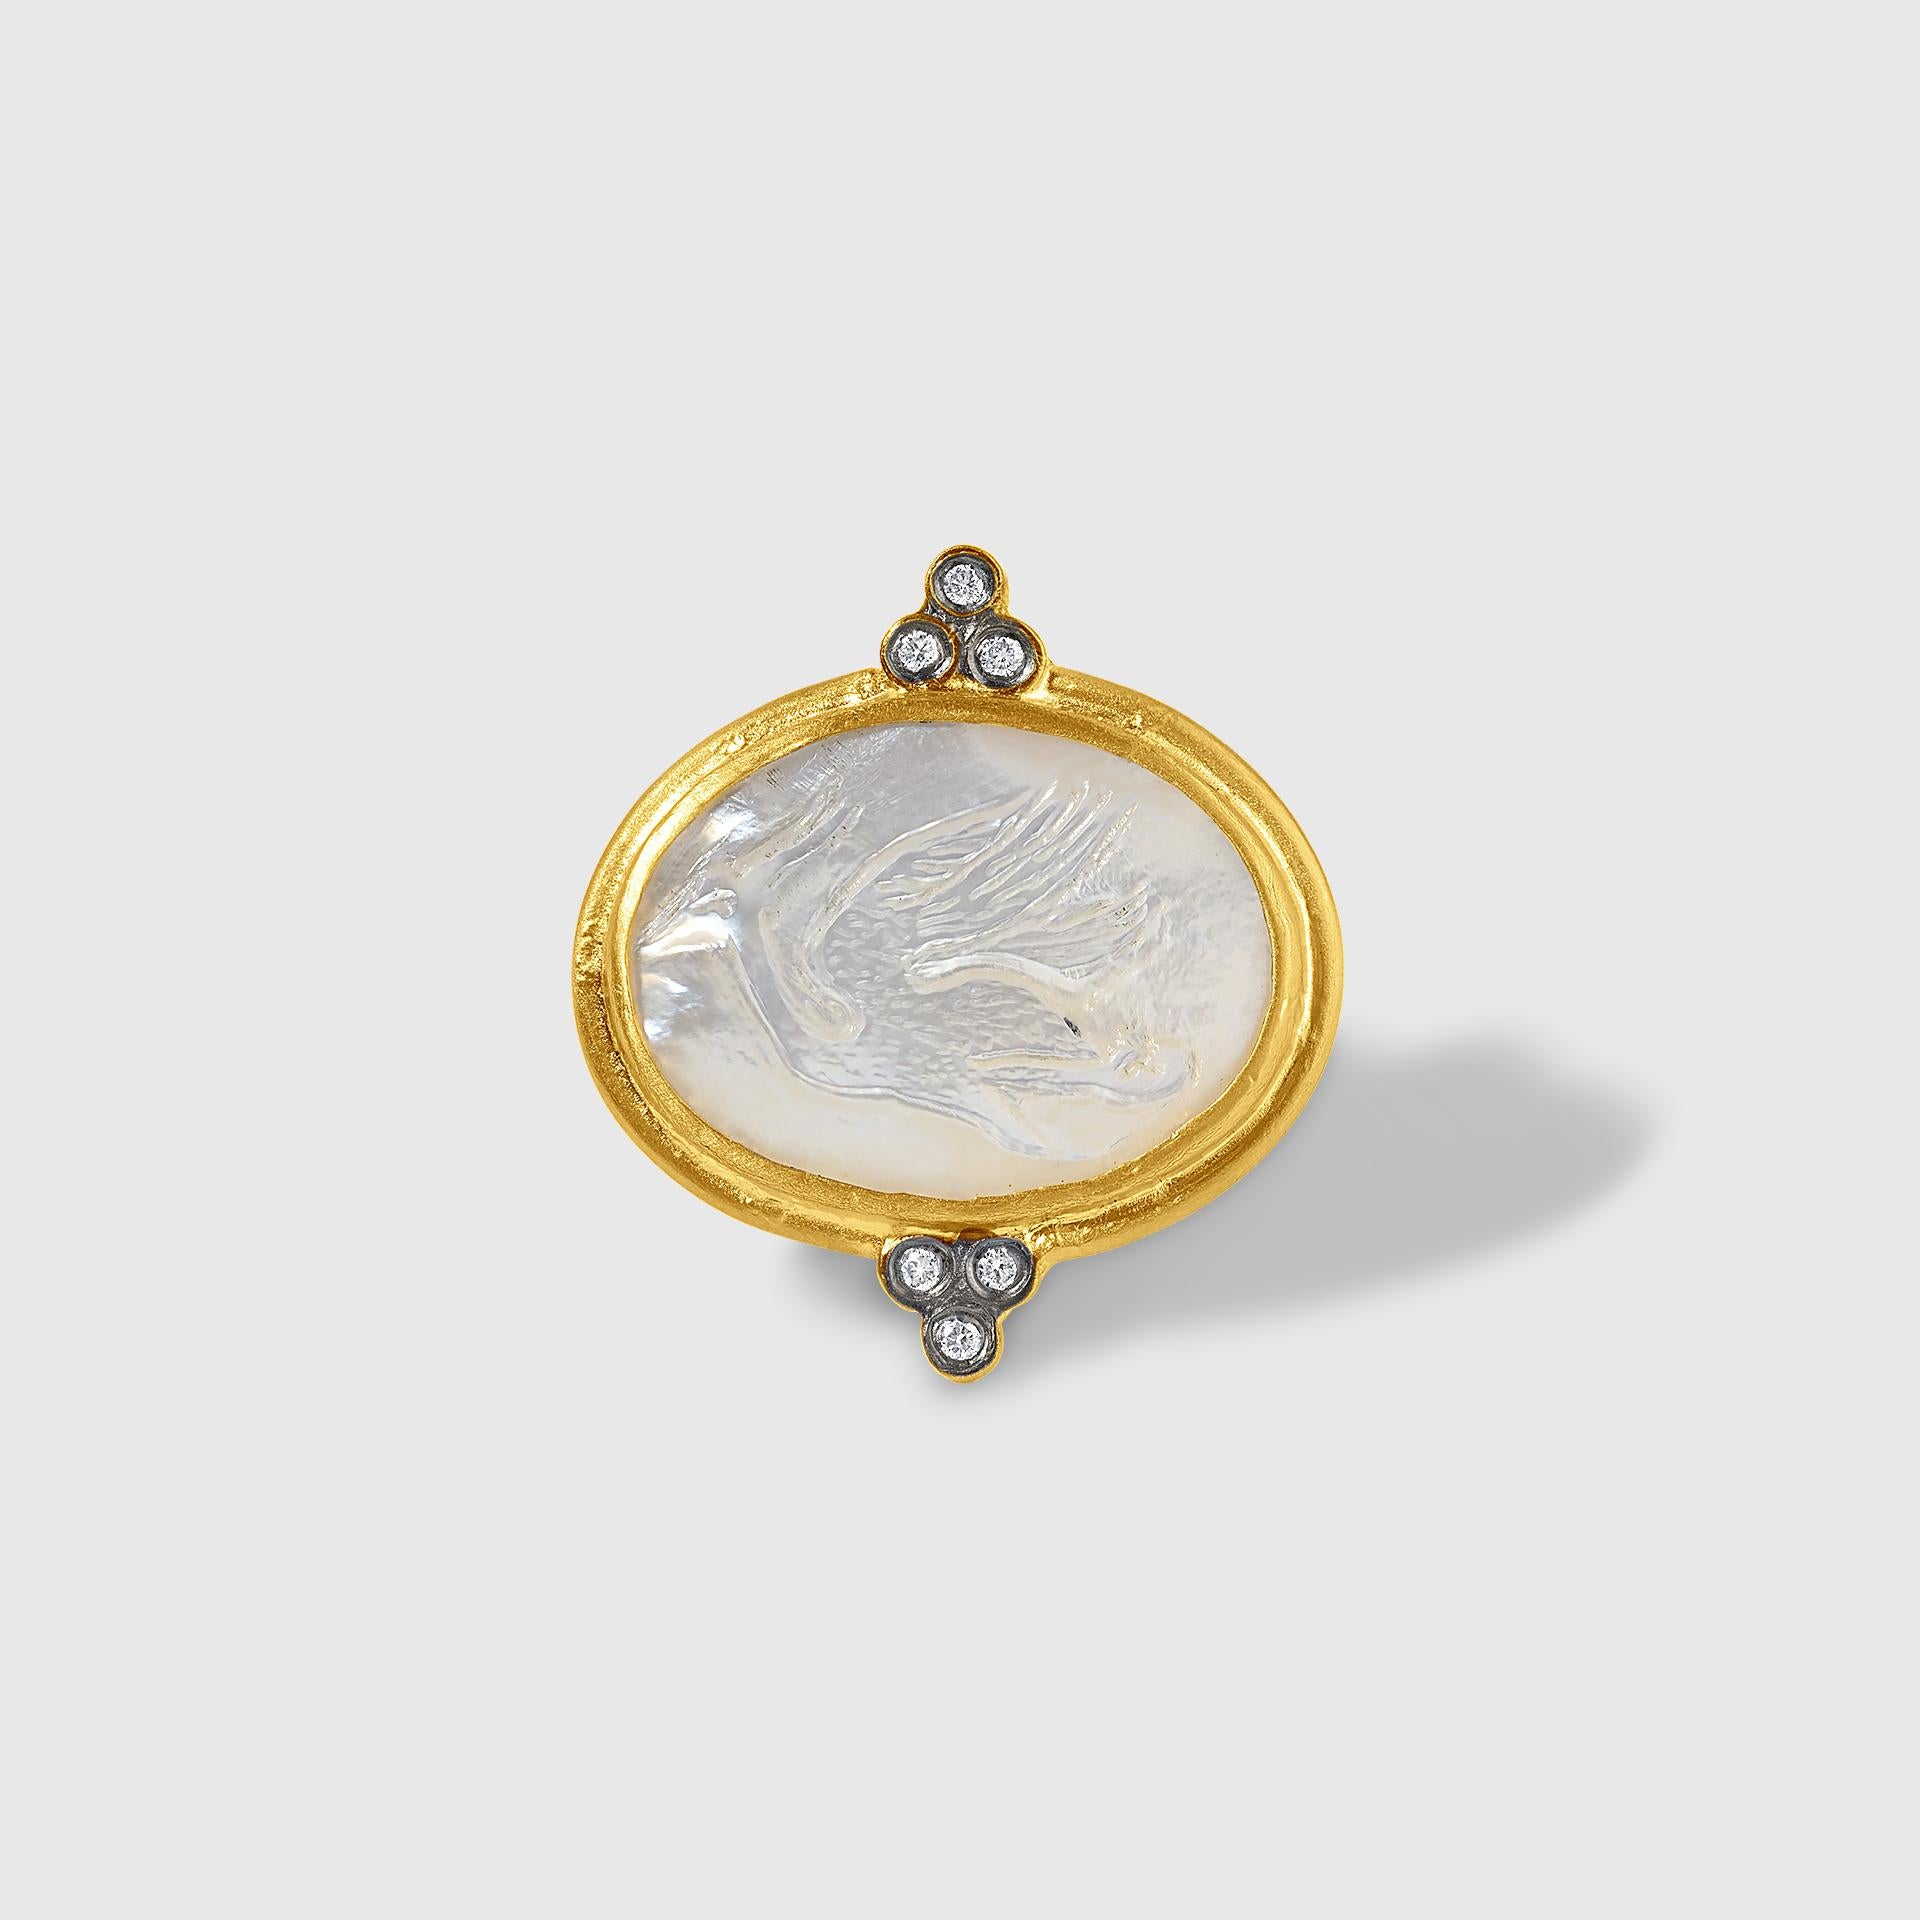 Mother of Pearl Ring with Carved Crane Motif, 24K and Diamonds (0.06 carats), 24K goldfused and sterling silver, by Kurtulan Jewellery of Istanbul, Turkey
Size 7 is in stock, please contact the gallery for different sizes as they are made to order